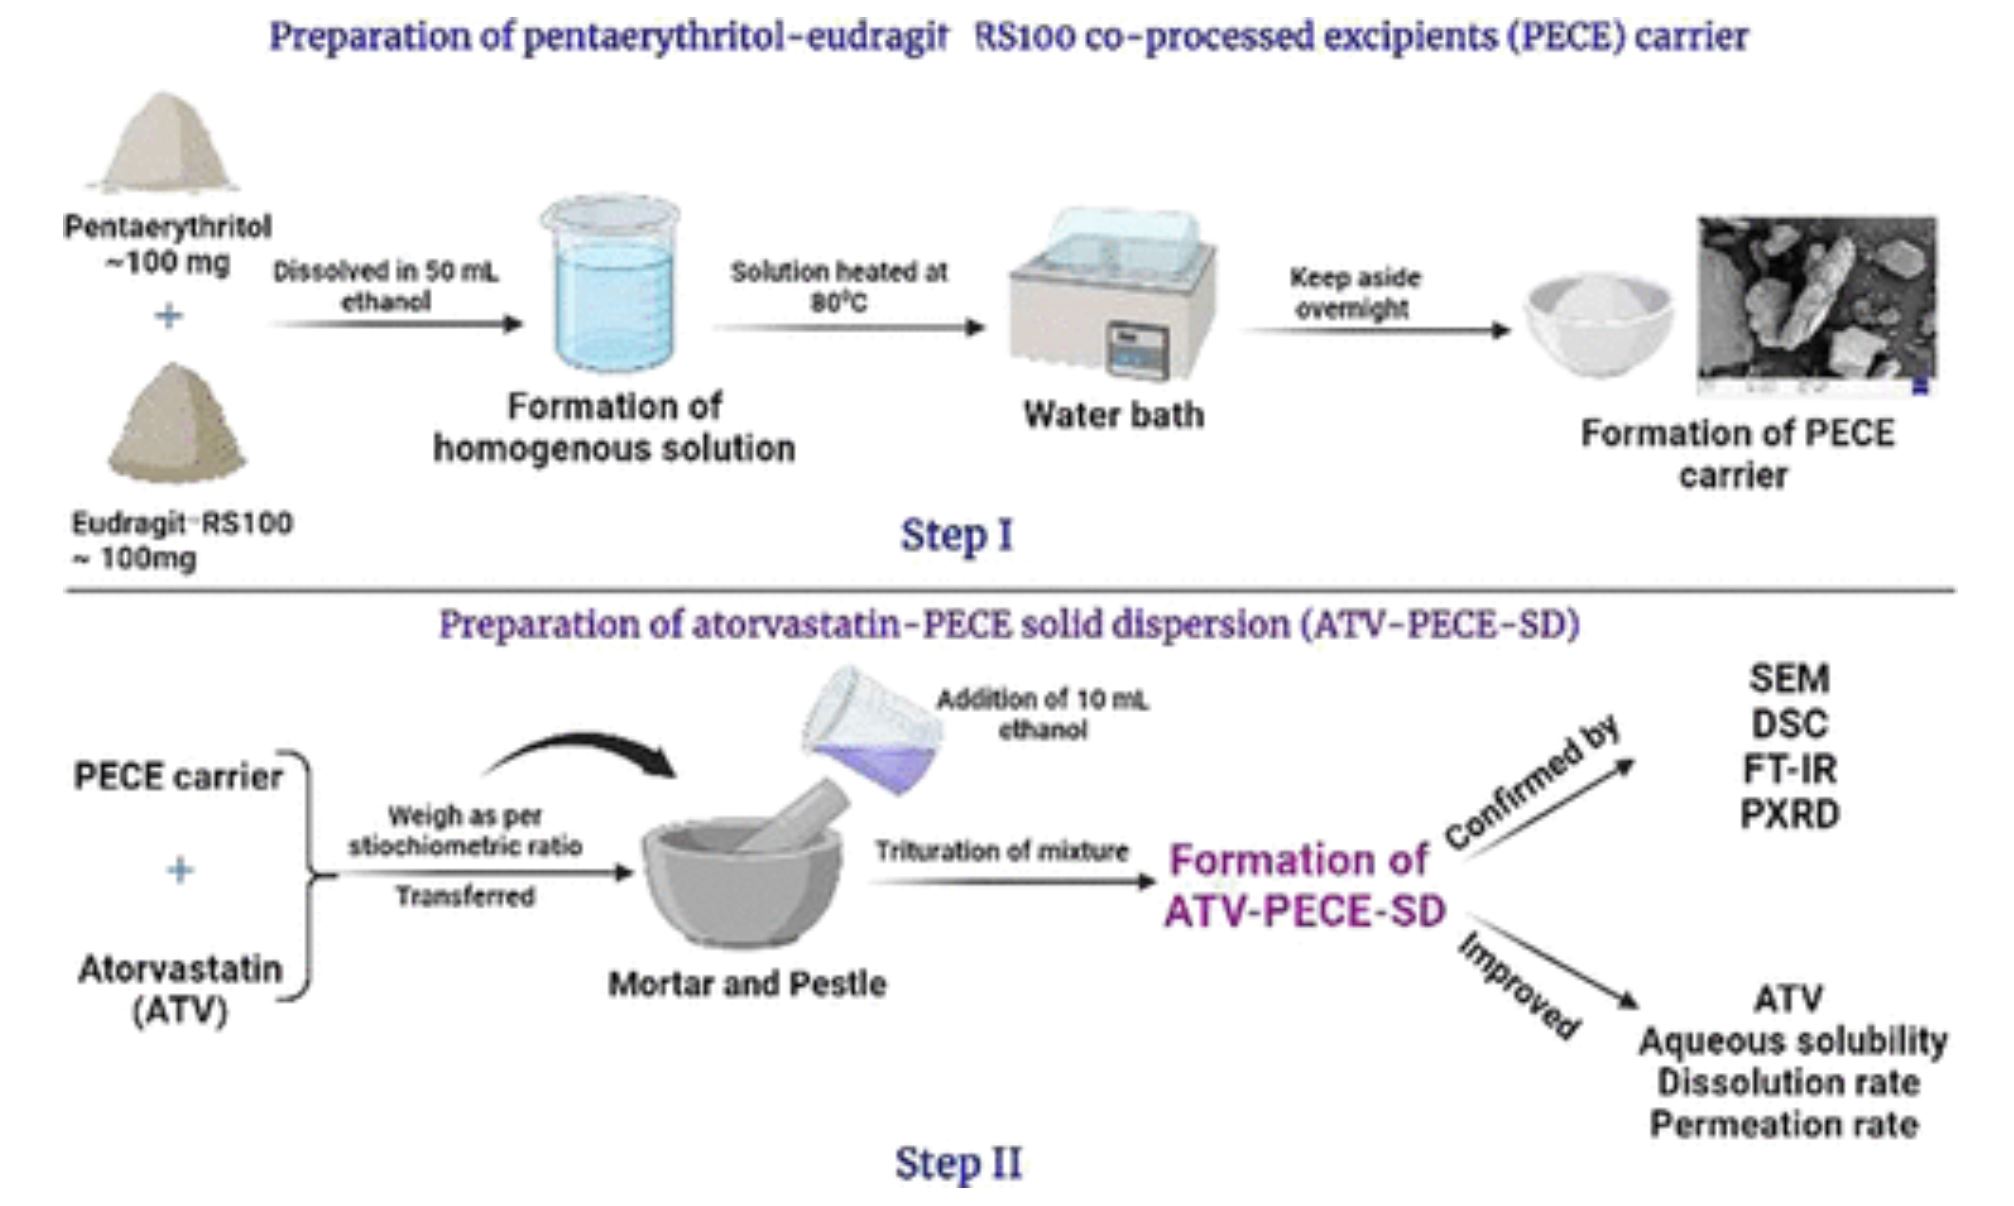 Development and Characterization of Pentaerythritol-EudragitRS100 Co-processed Excipients as Solid Dispersion Carriers for Enhanced Aqueous Solubility, In Vitro Dissolution, and Ex Vivo Permeation of Atorvastatin